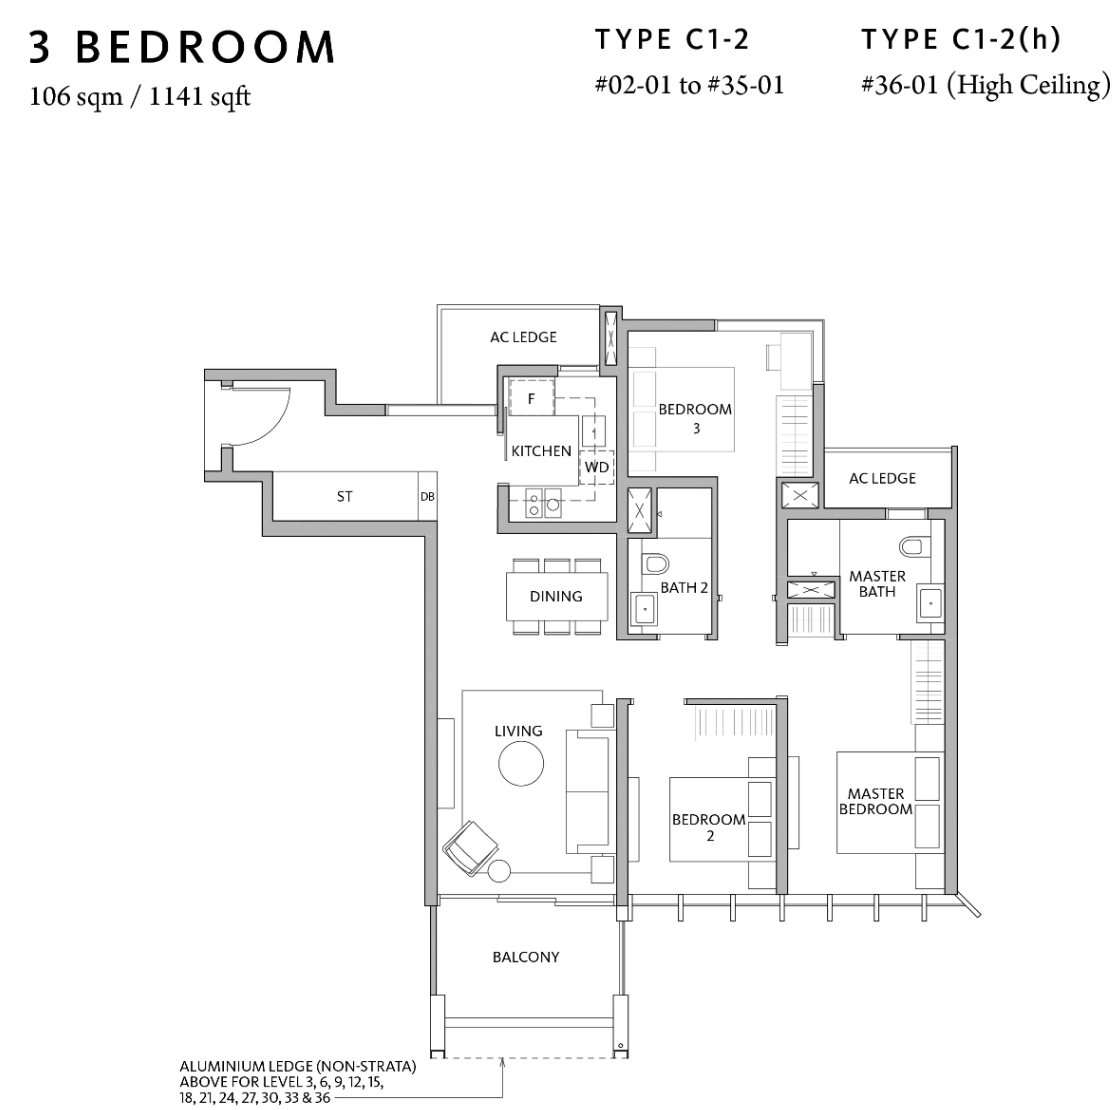 Riviere 3 bedroom layout